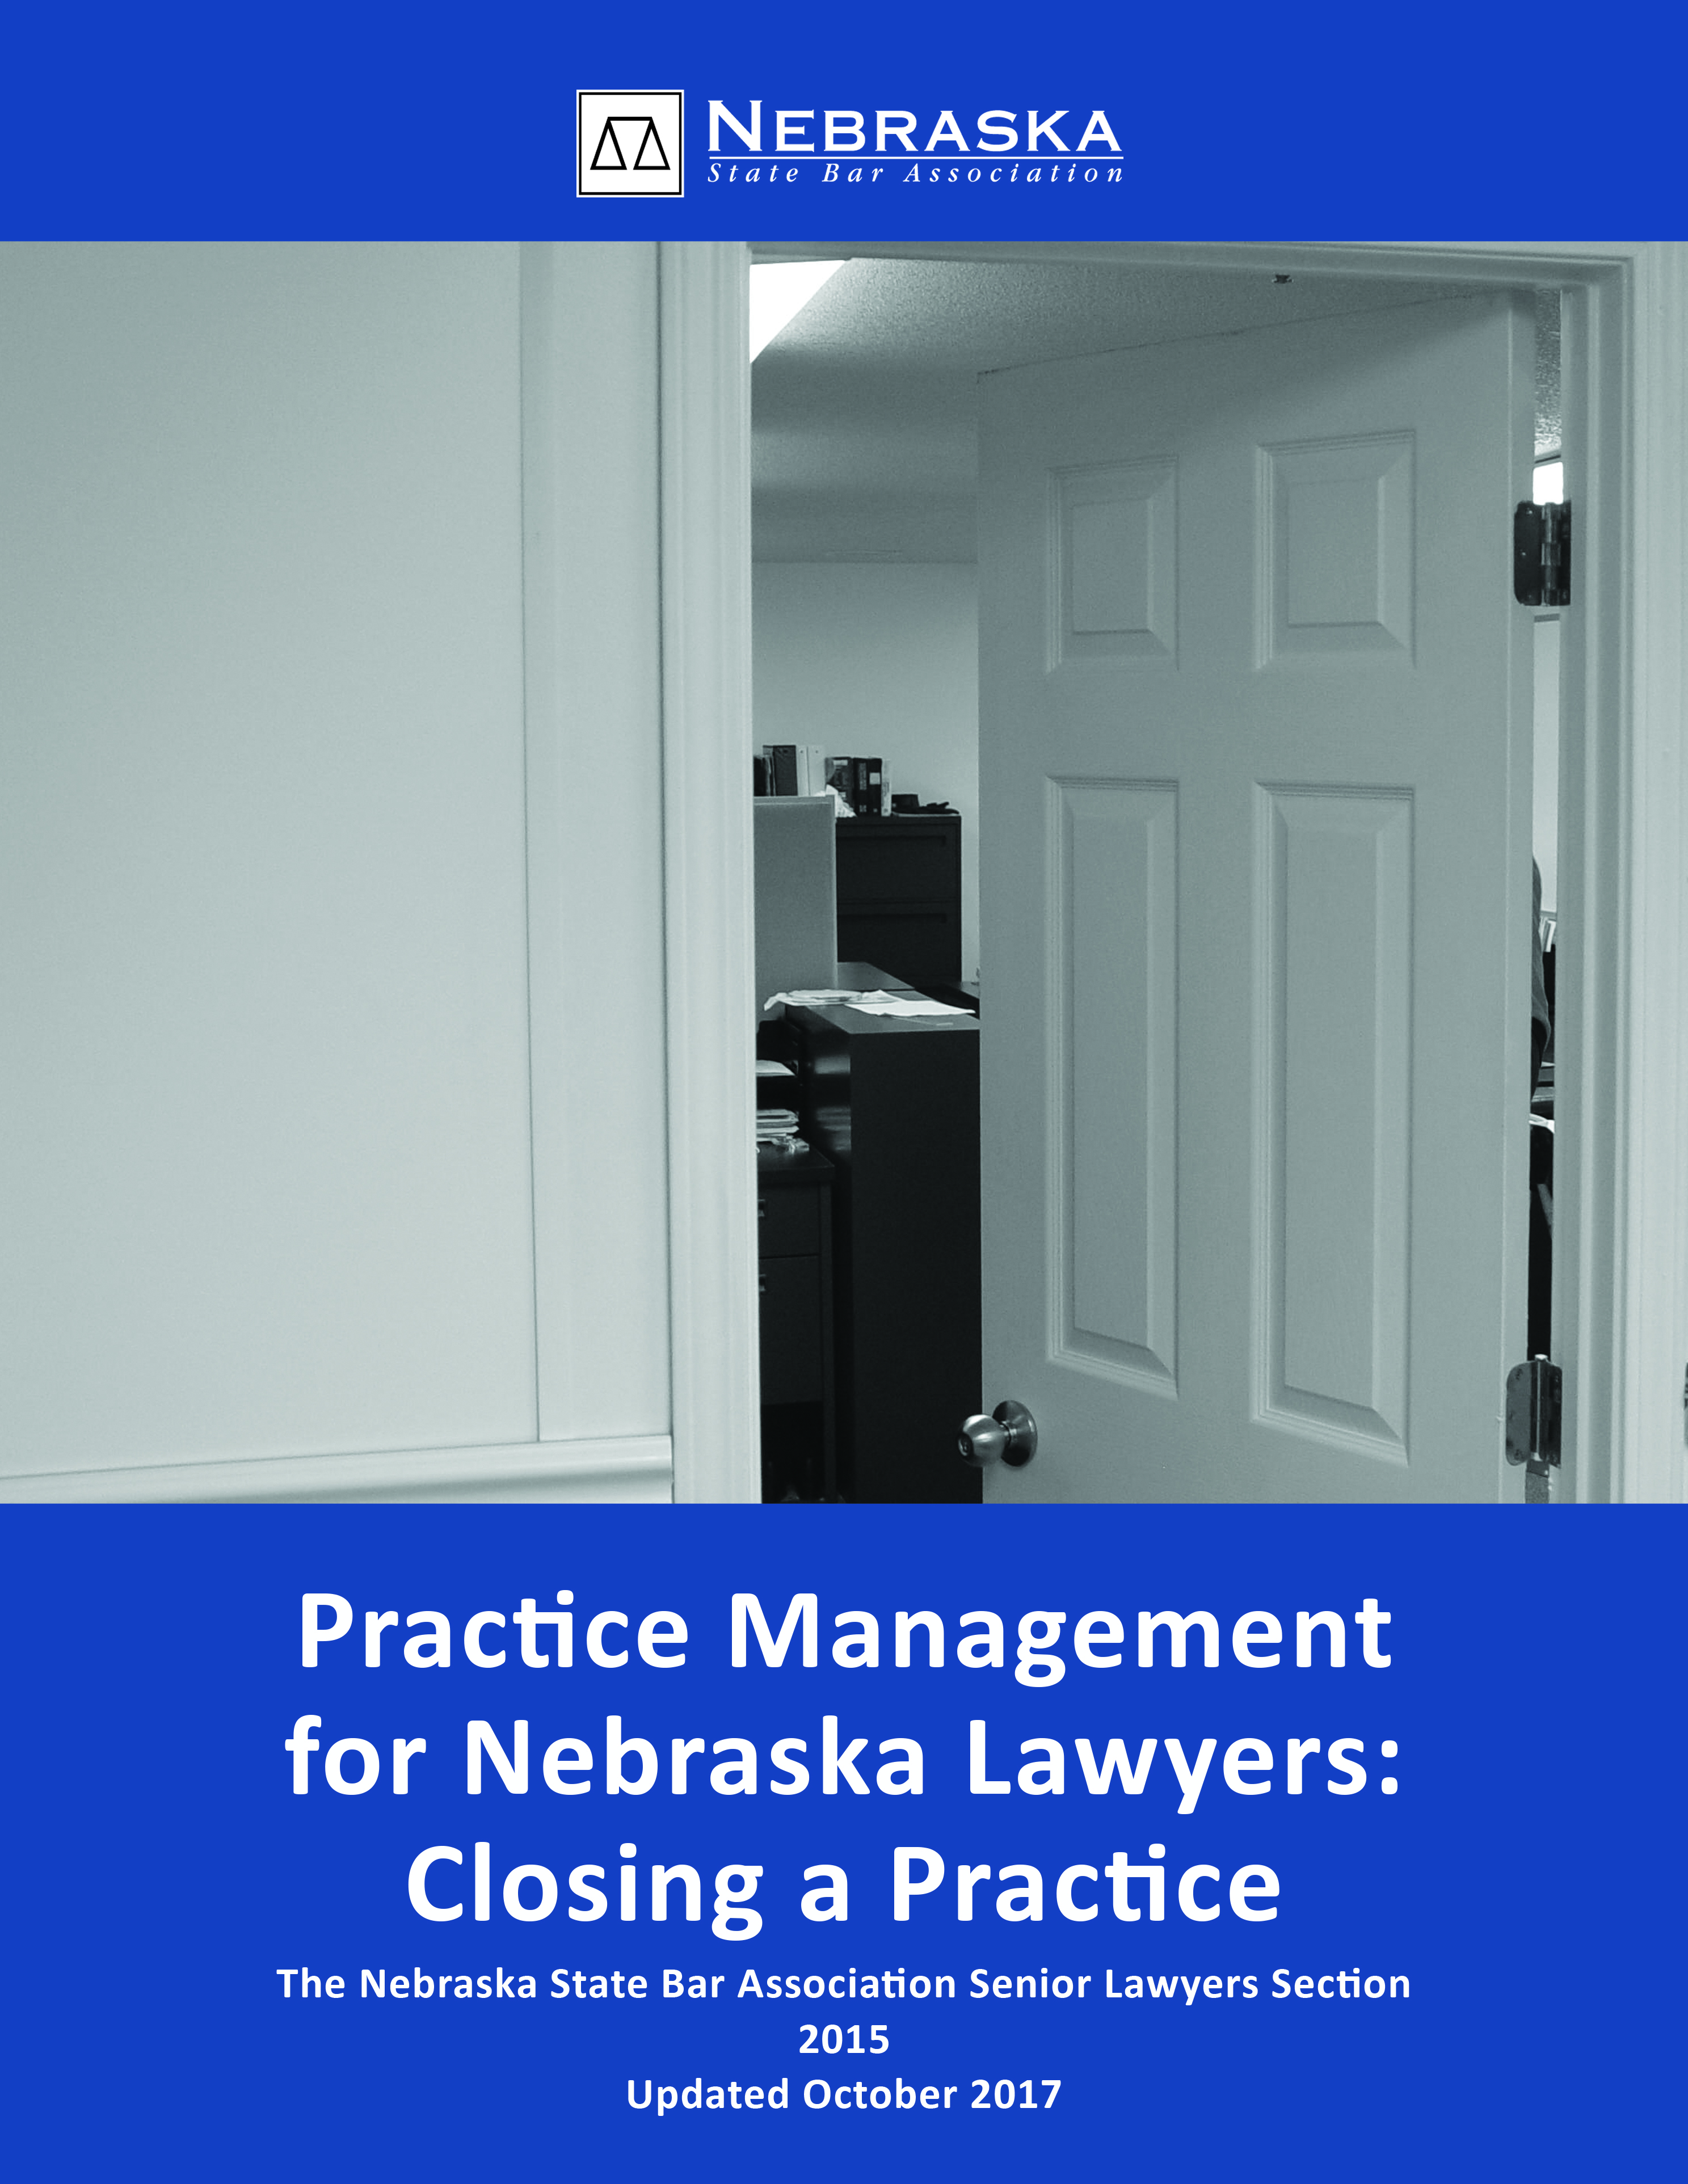 Closing A Practice (Practice Management for Nebraska Lawyers)